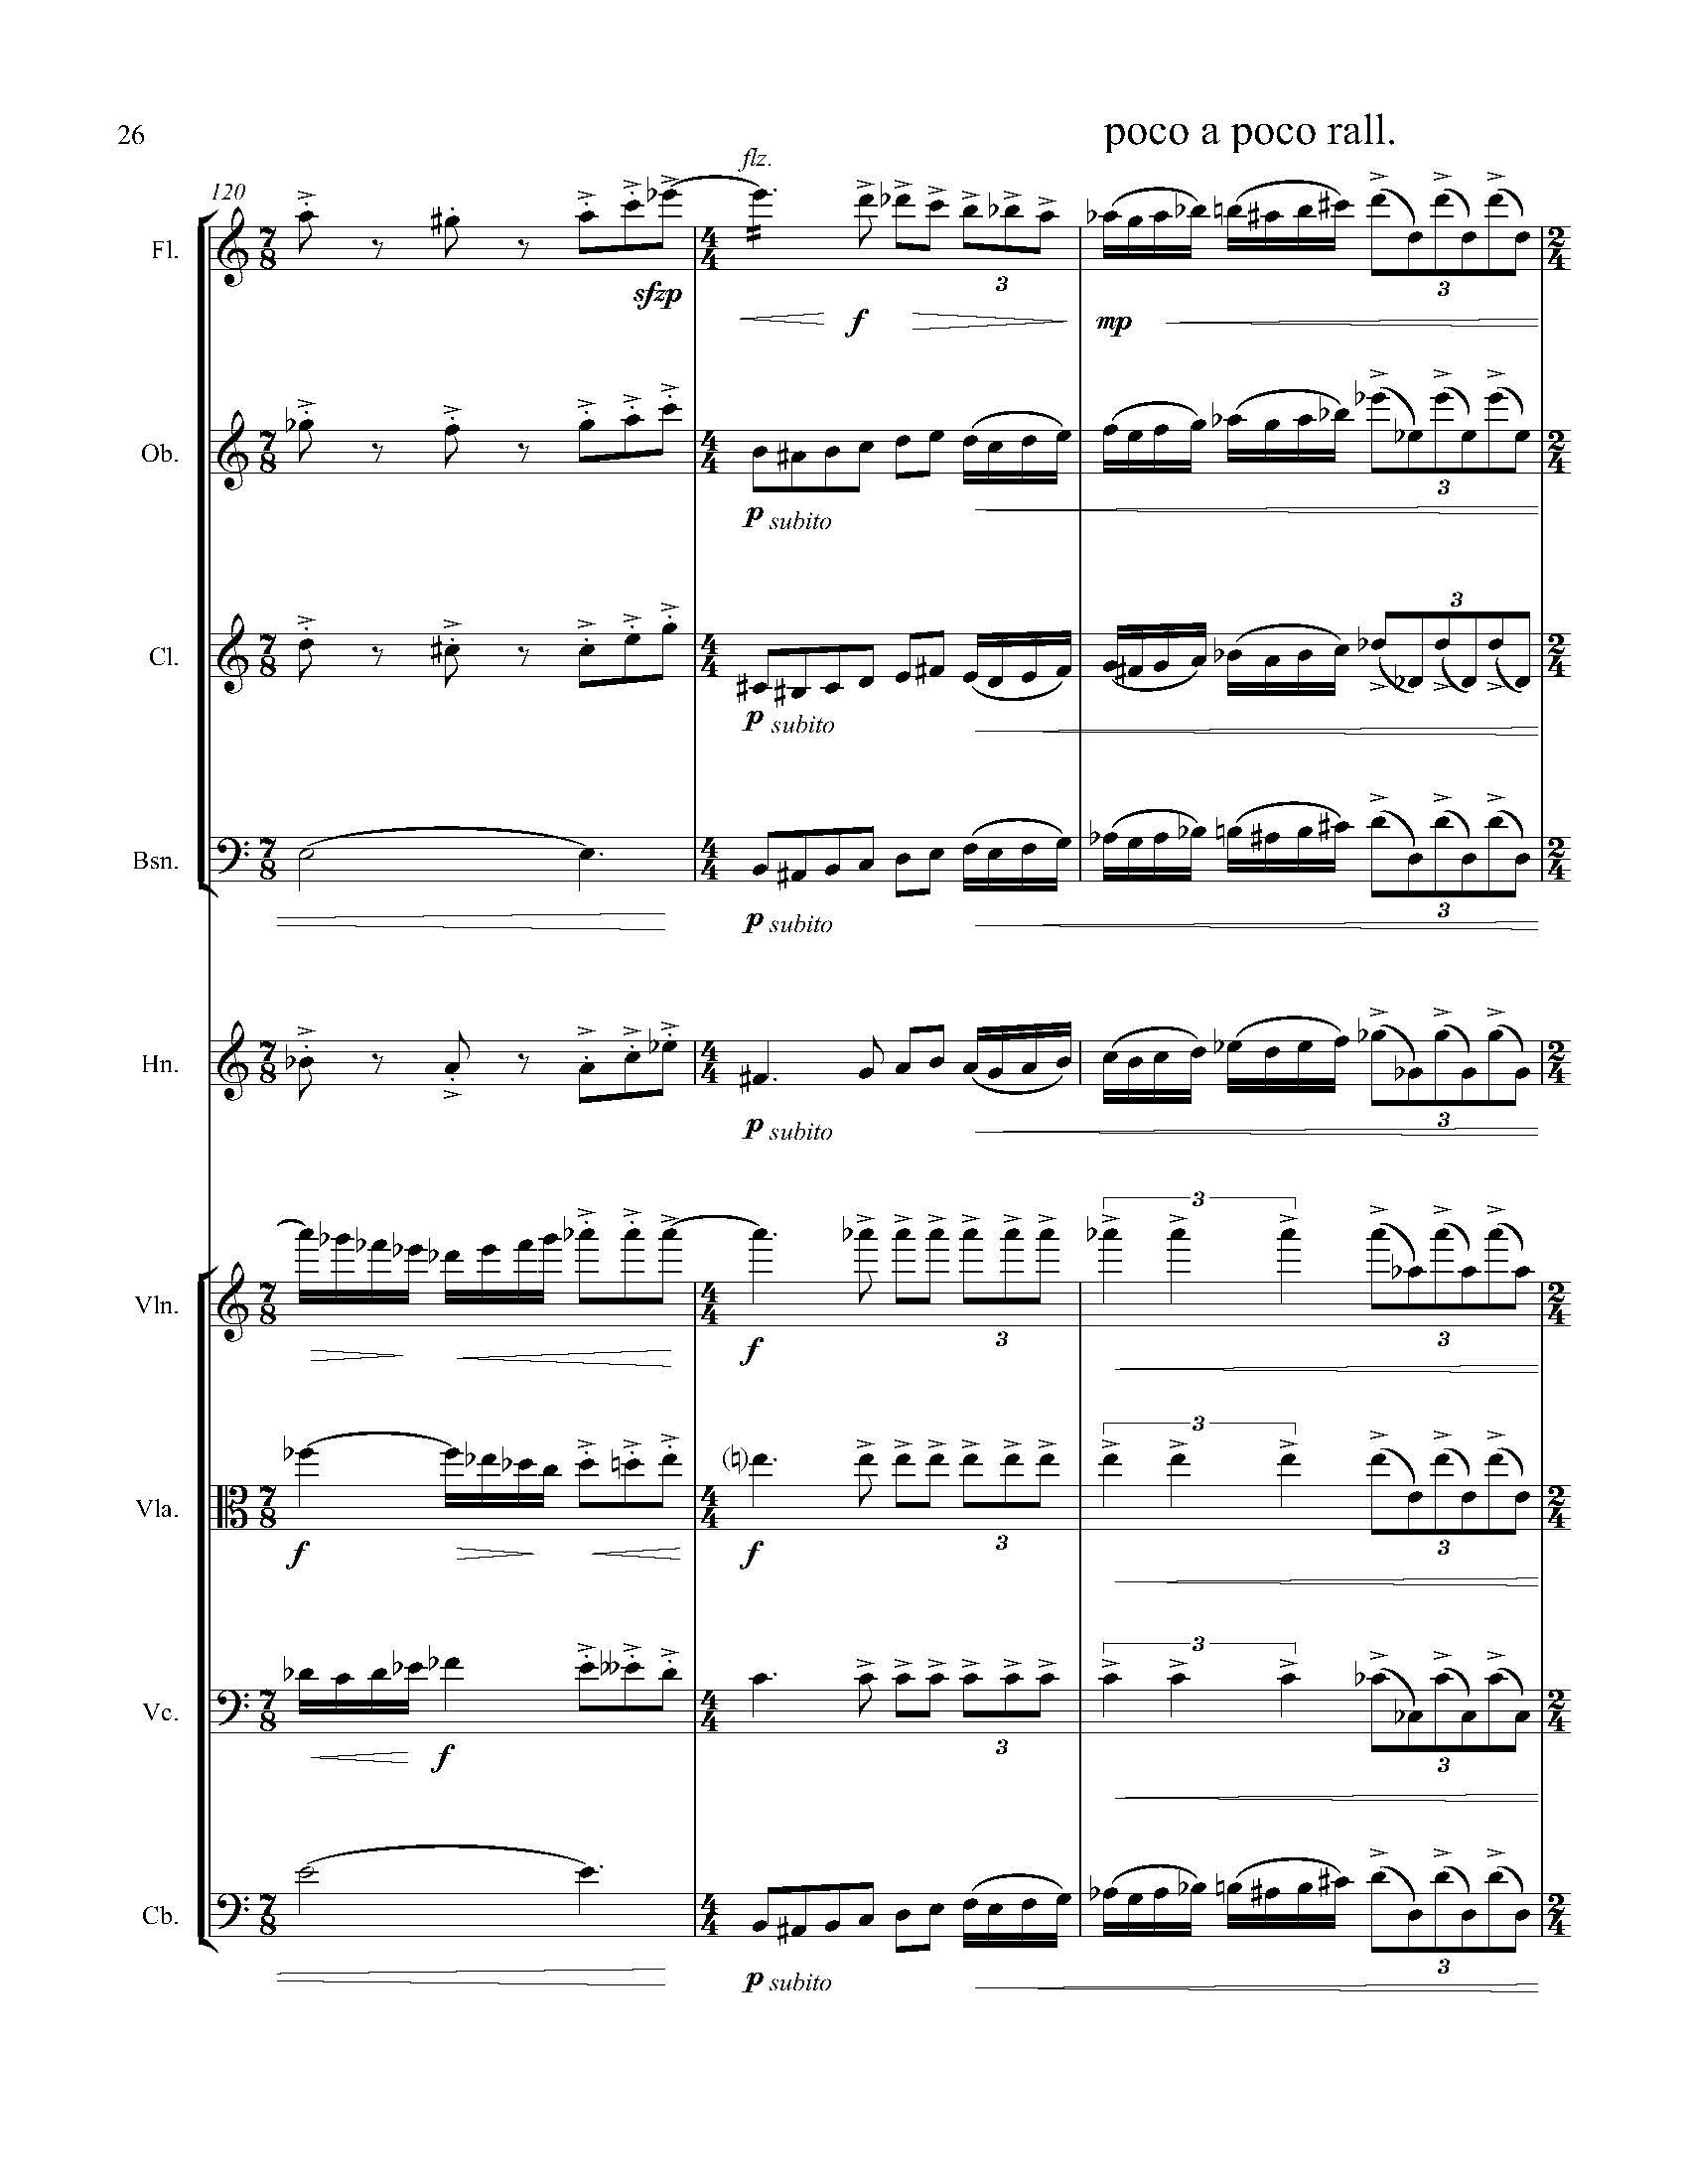 In Search of a Bird - Complete Score_Page_32.jpg